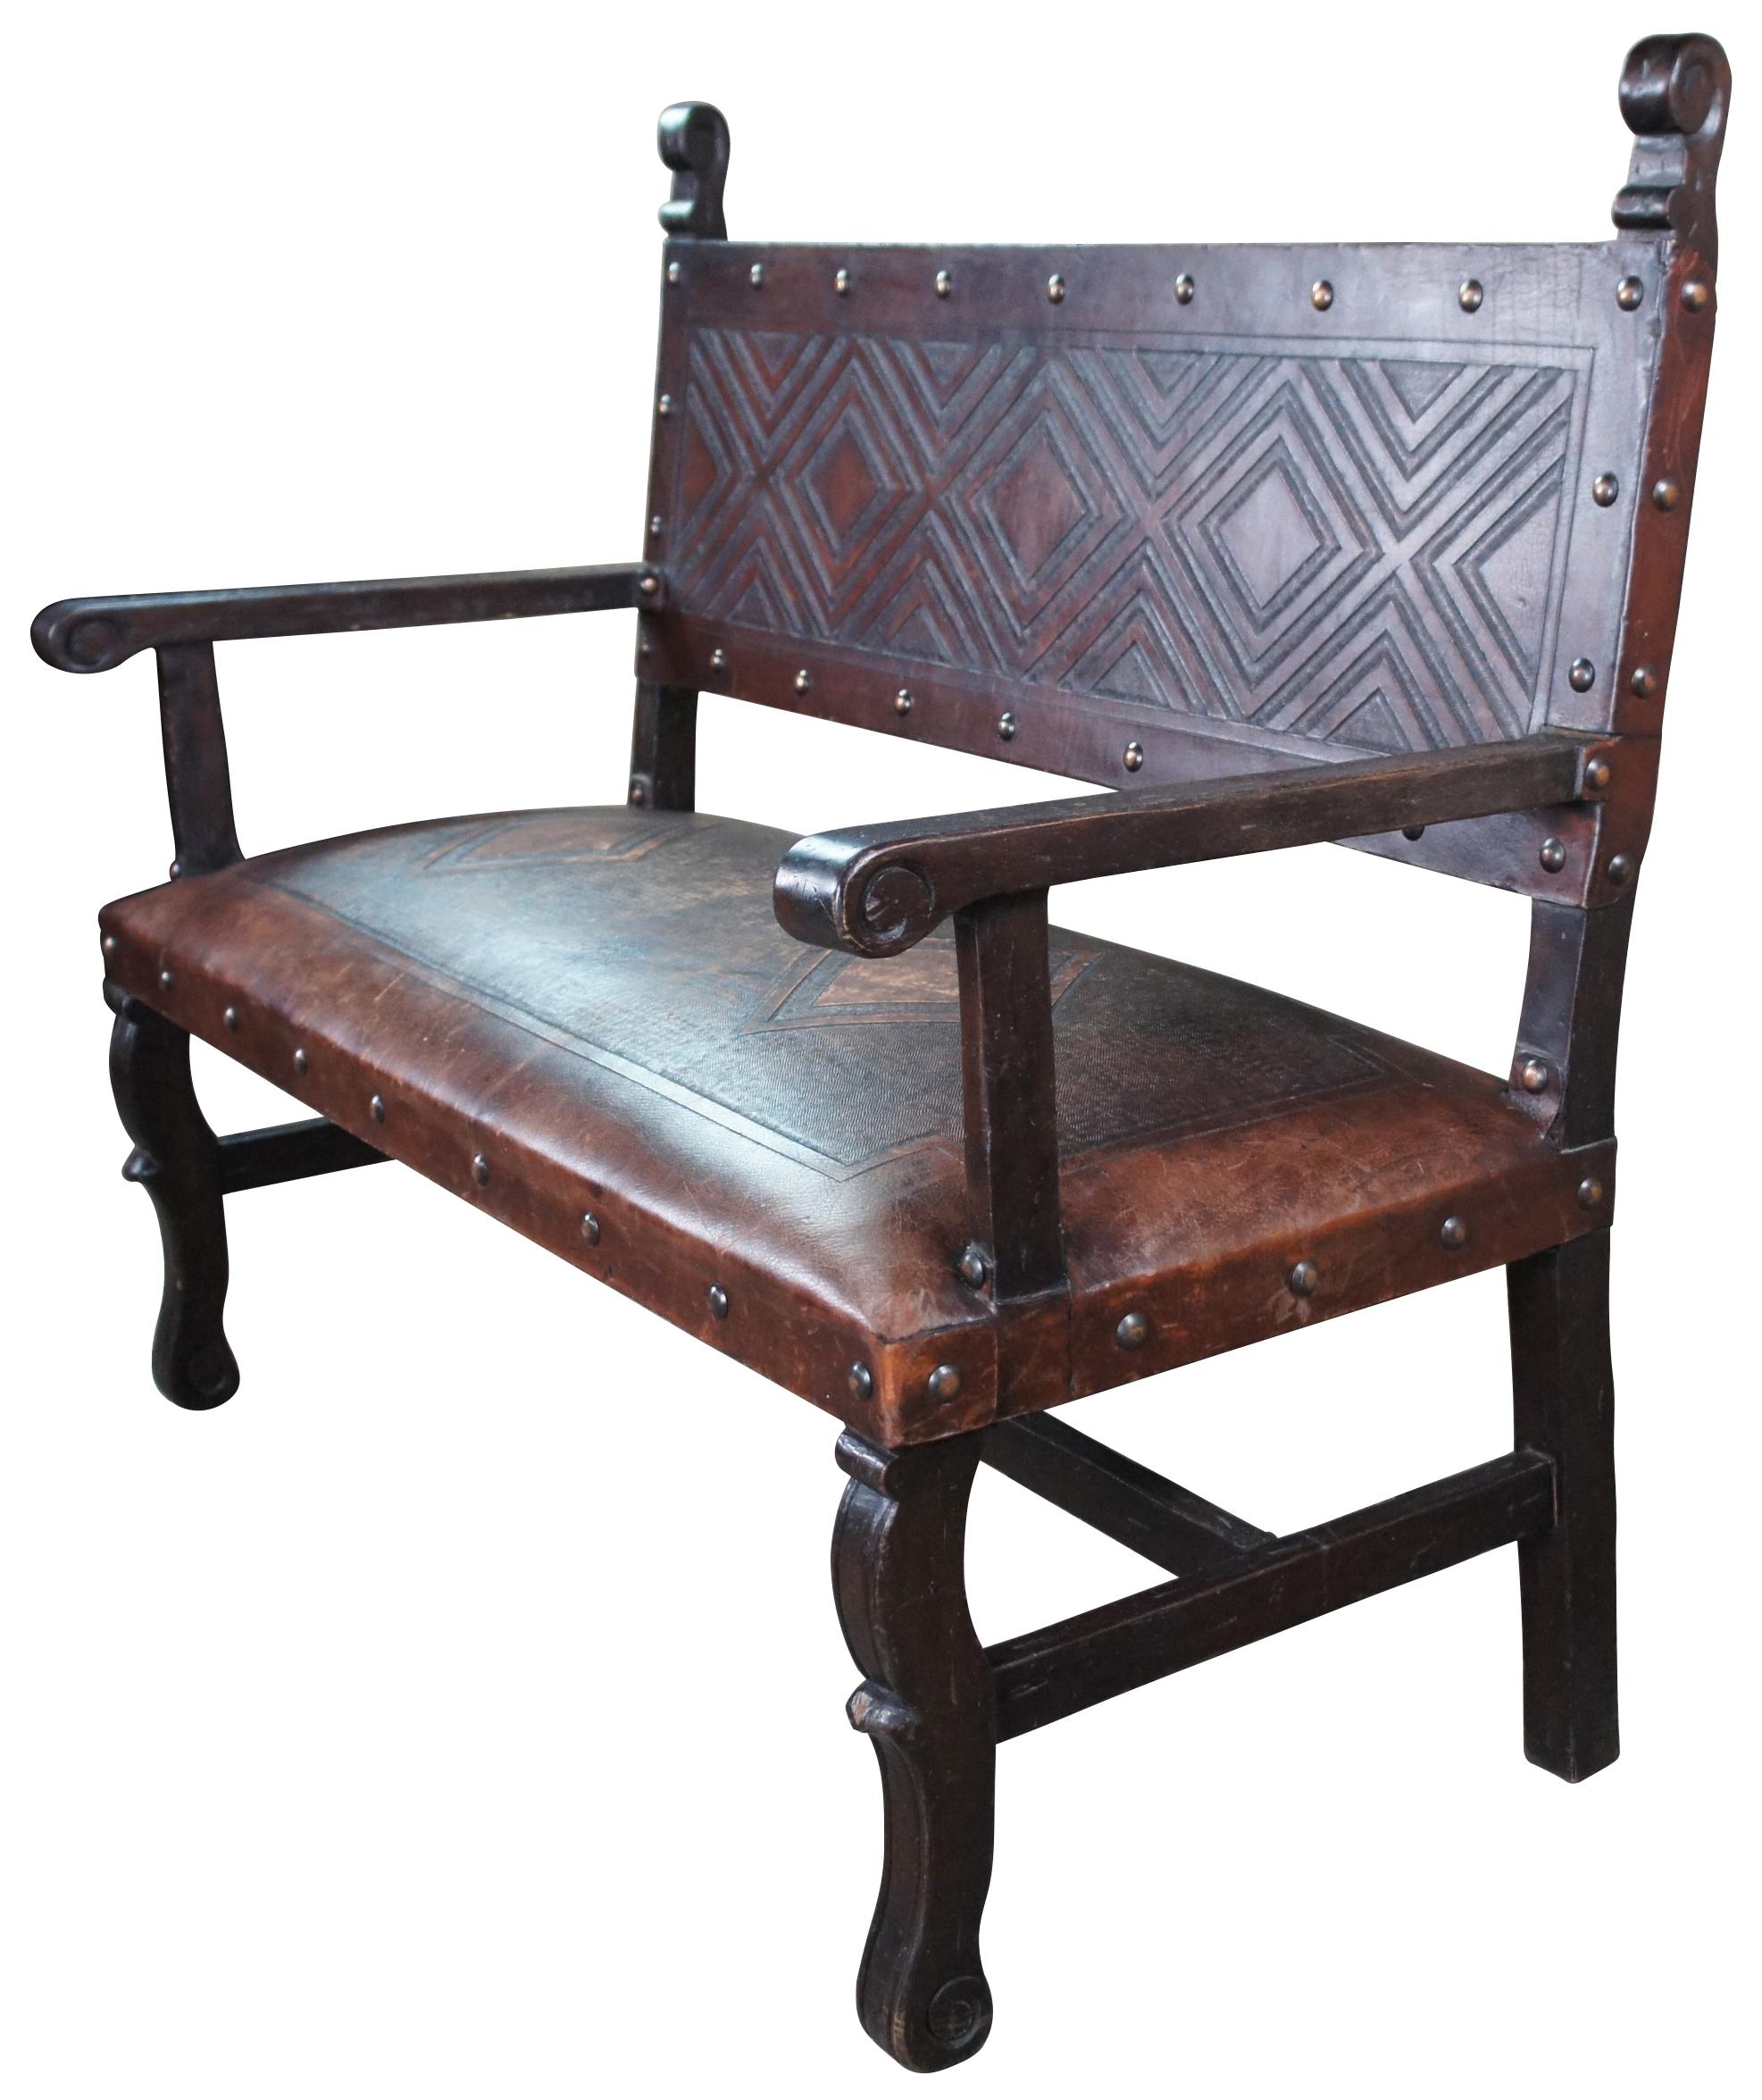 Vintage Spanish Heritage tooled leather bench featuring geometric diamond and nailhead design. Measures: 51